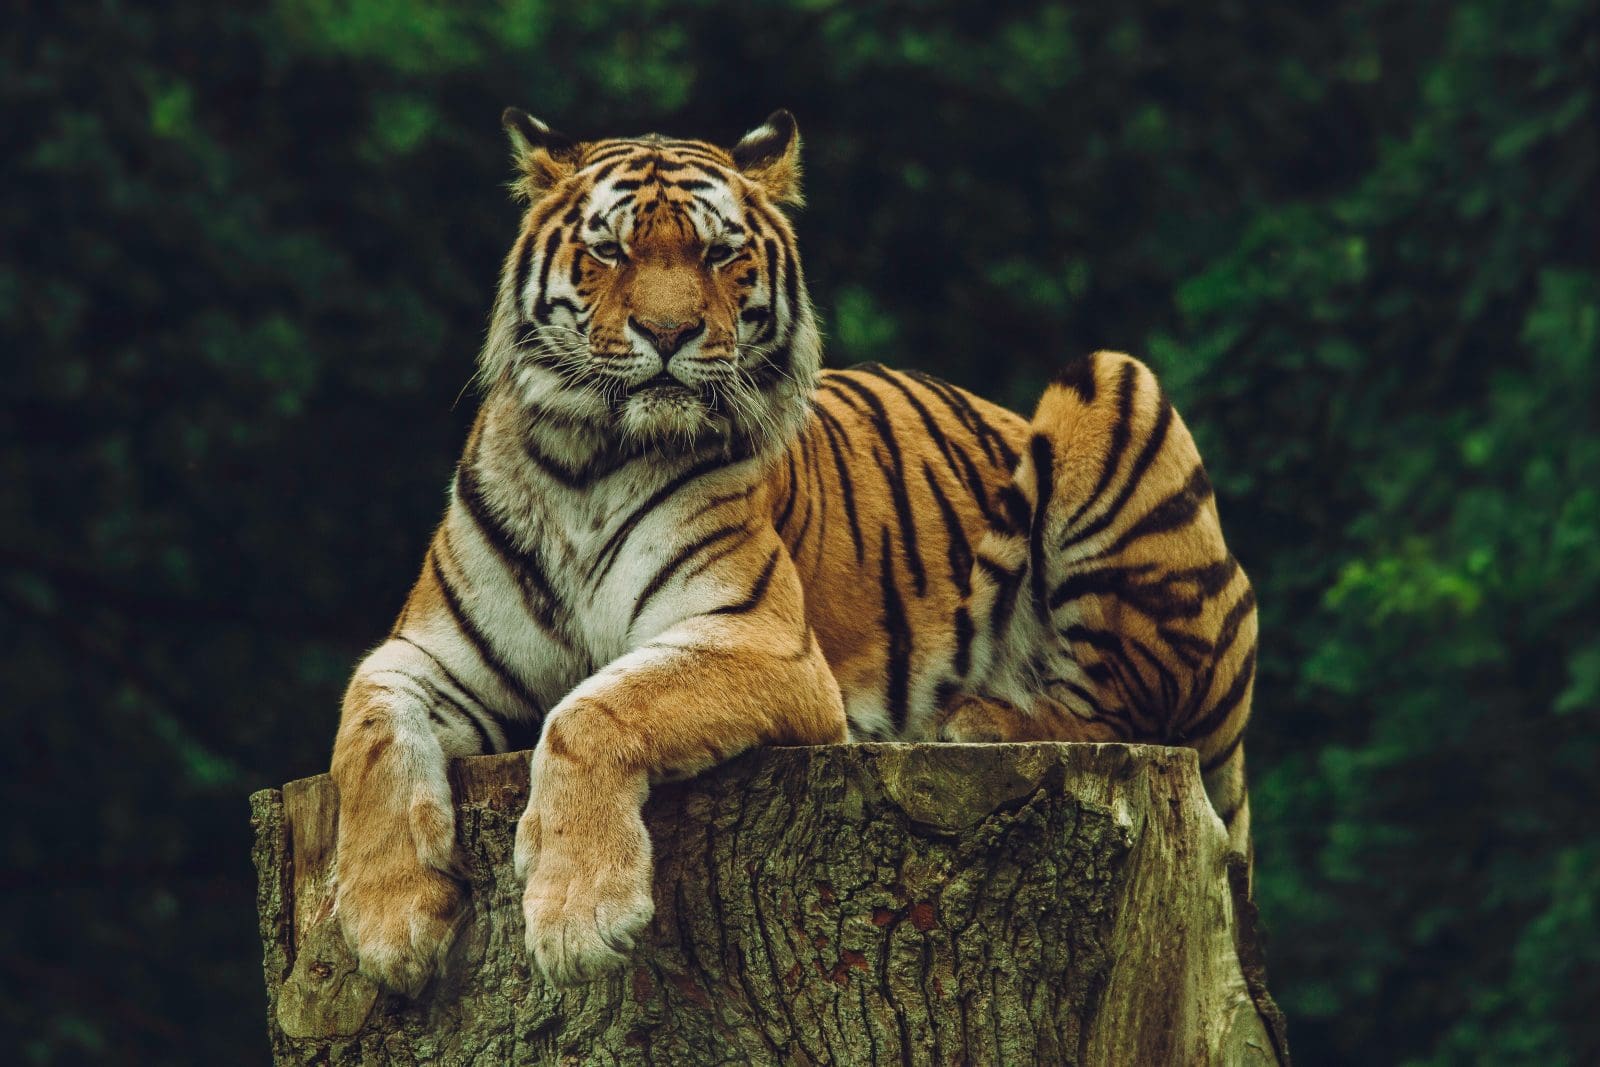 The Mystery Behind New Jersey's 'Tiger Lady' - New Jersey Digest